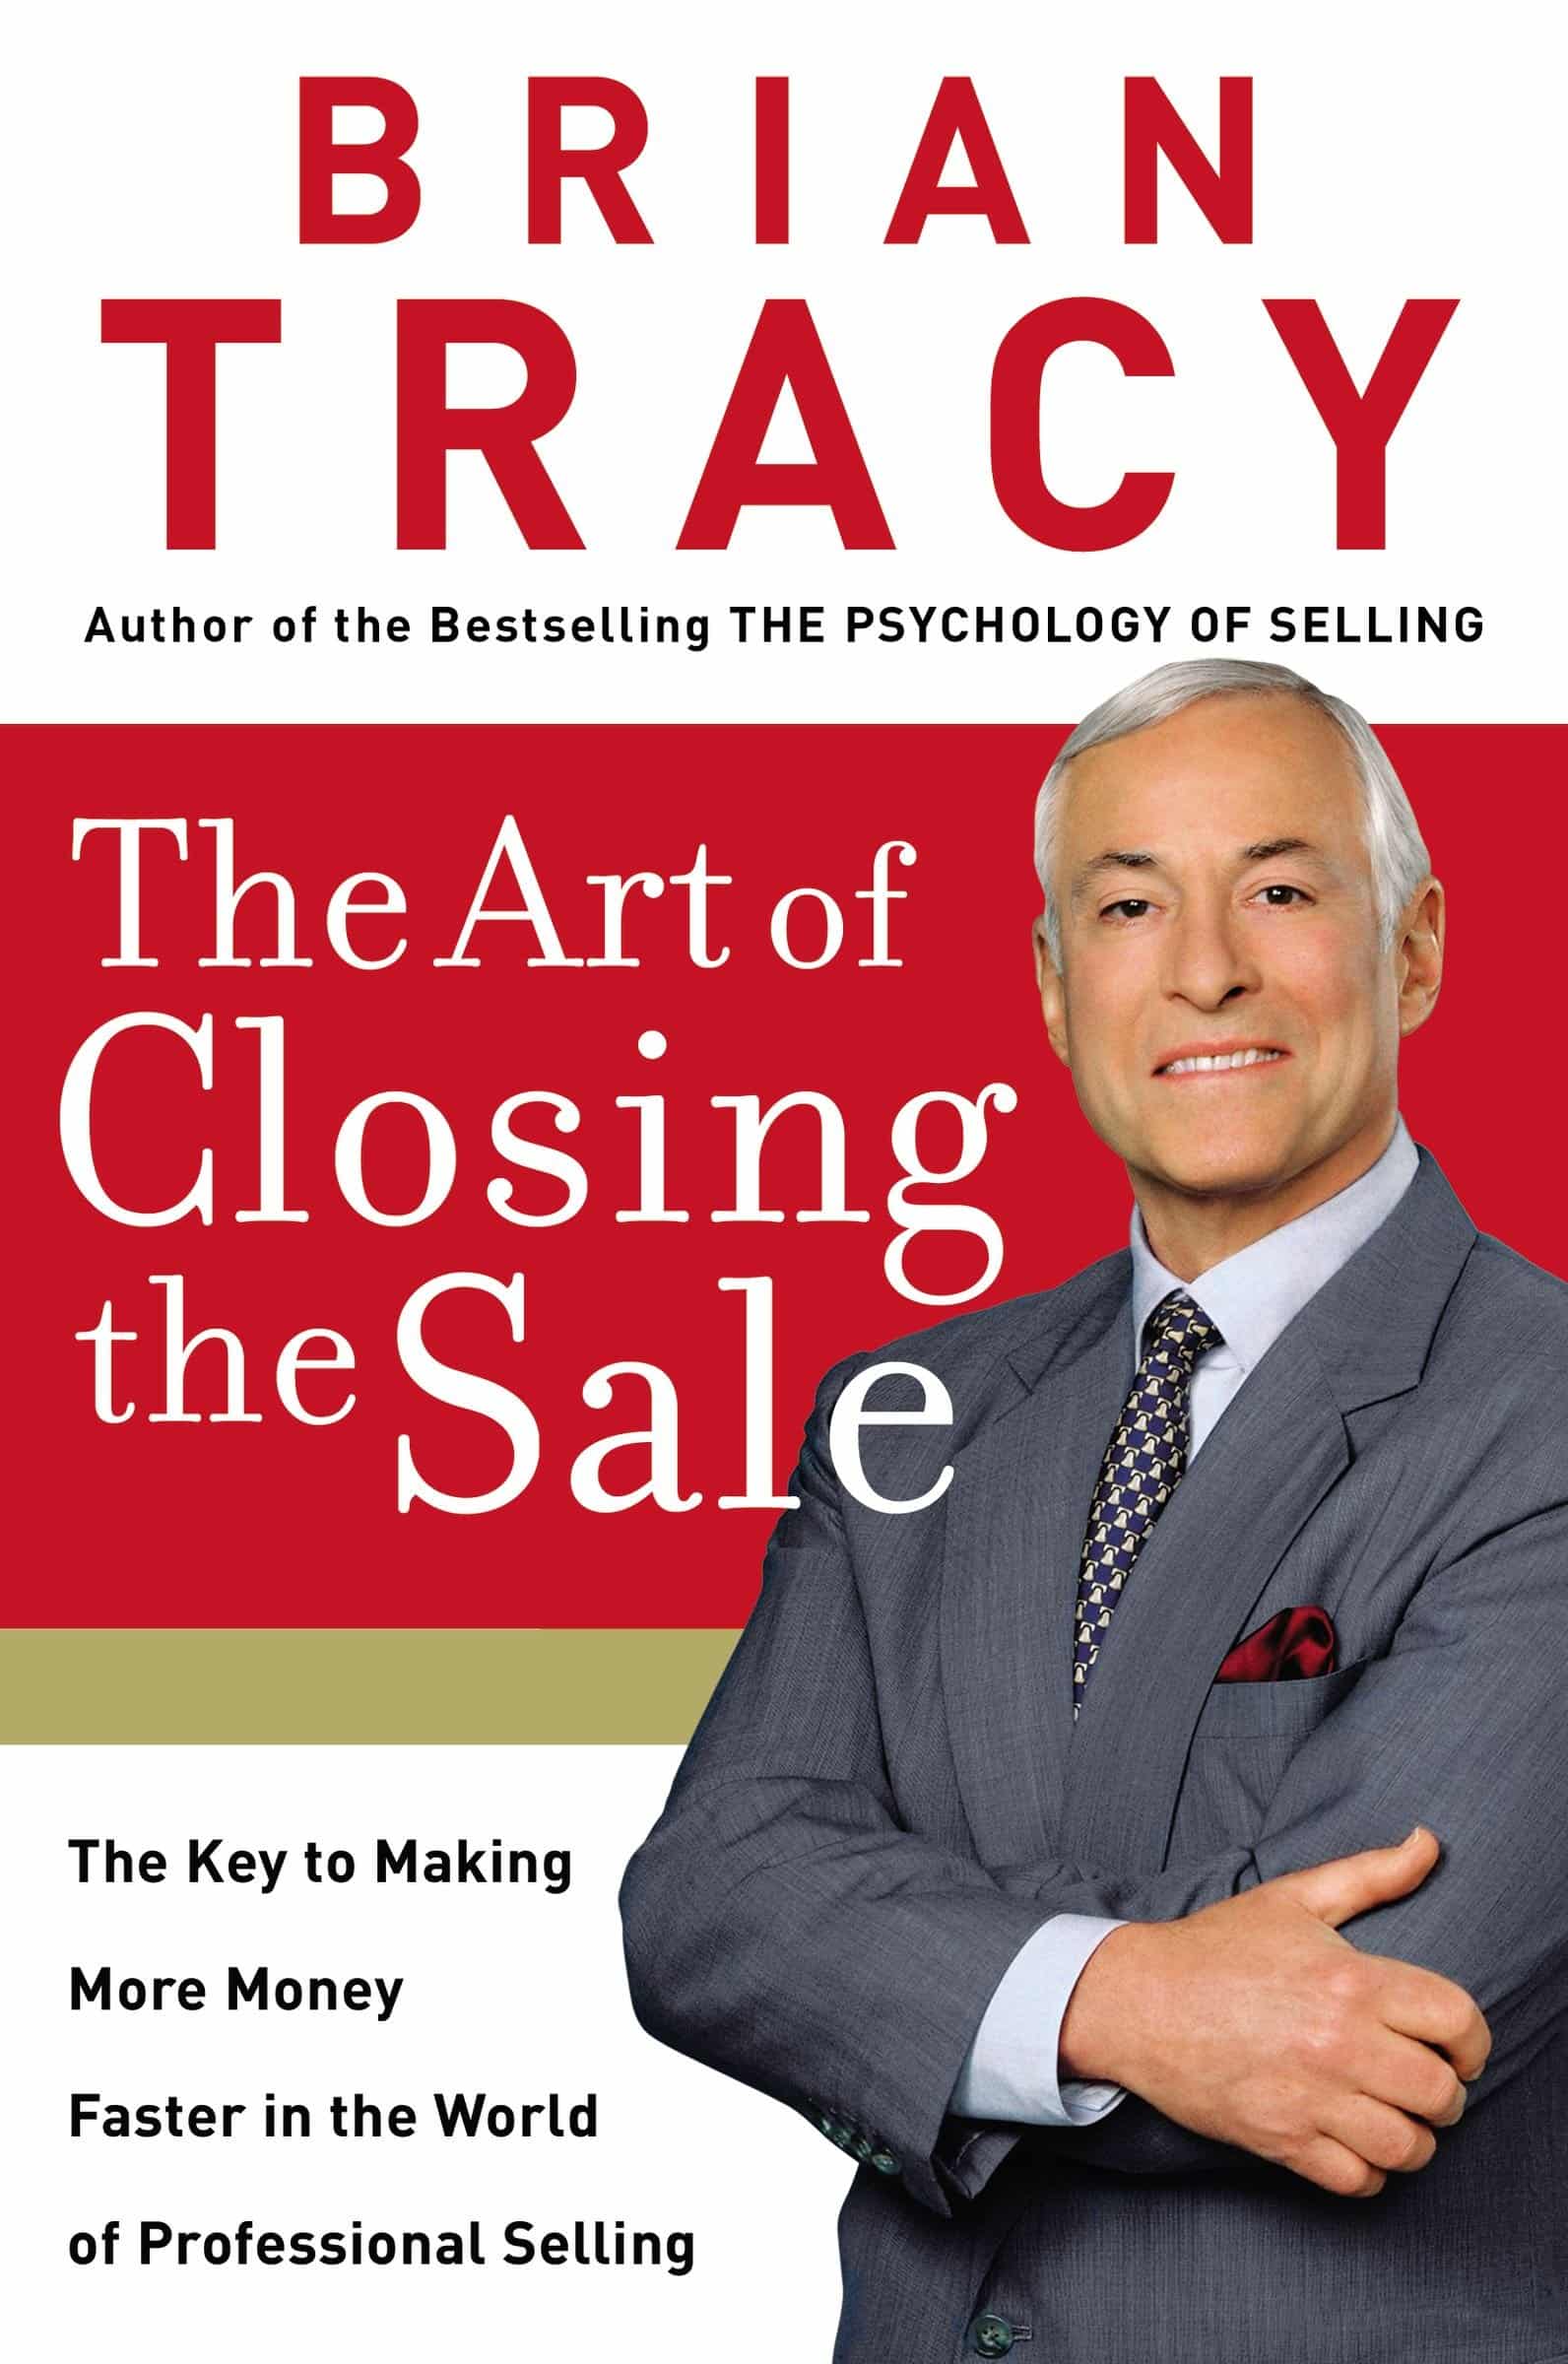 The Art of Closing the Sale: The Key to Making More Money Faster in the World of Professional Selling by Brian Tracy